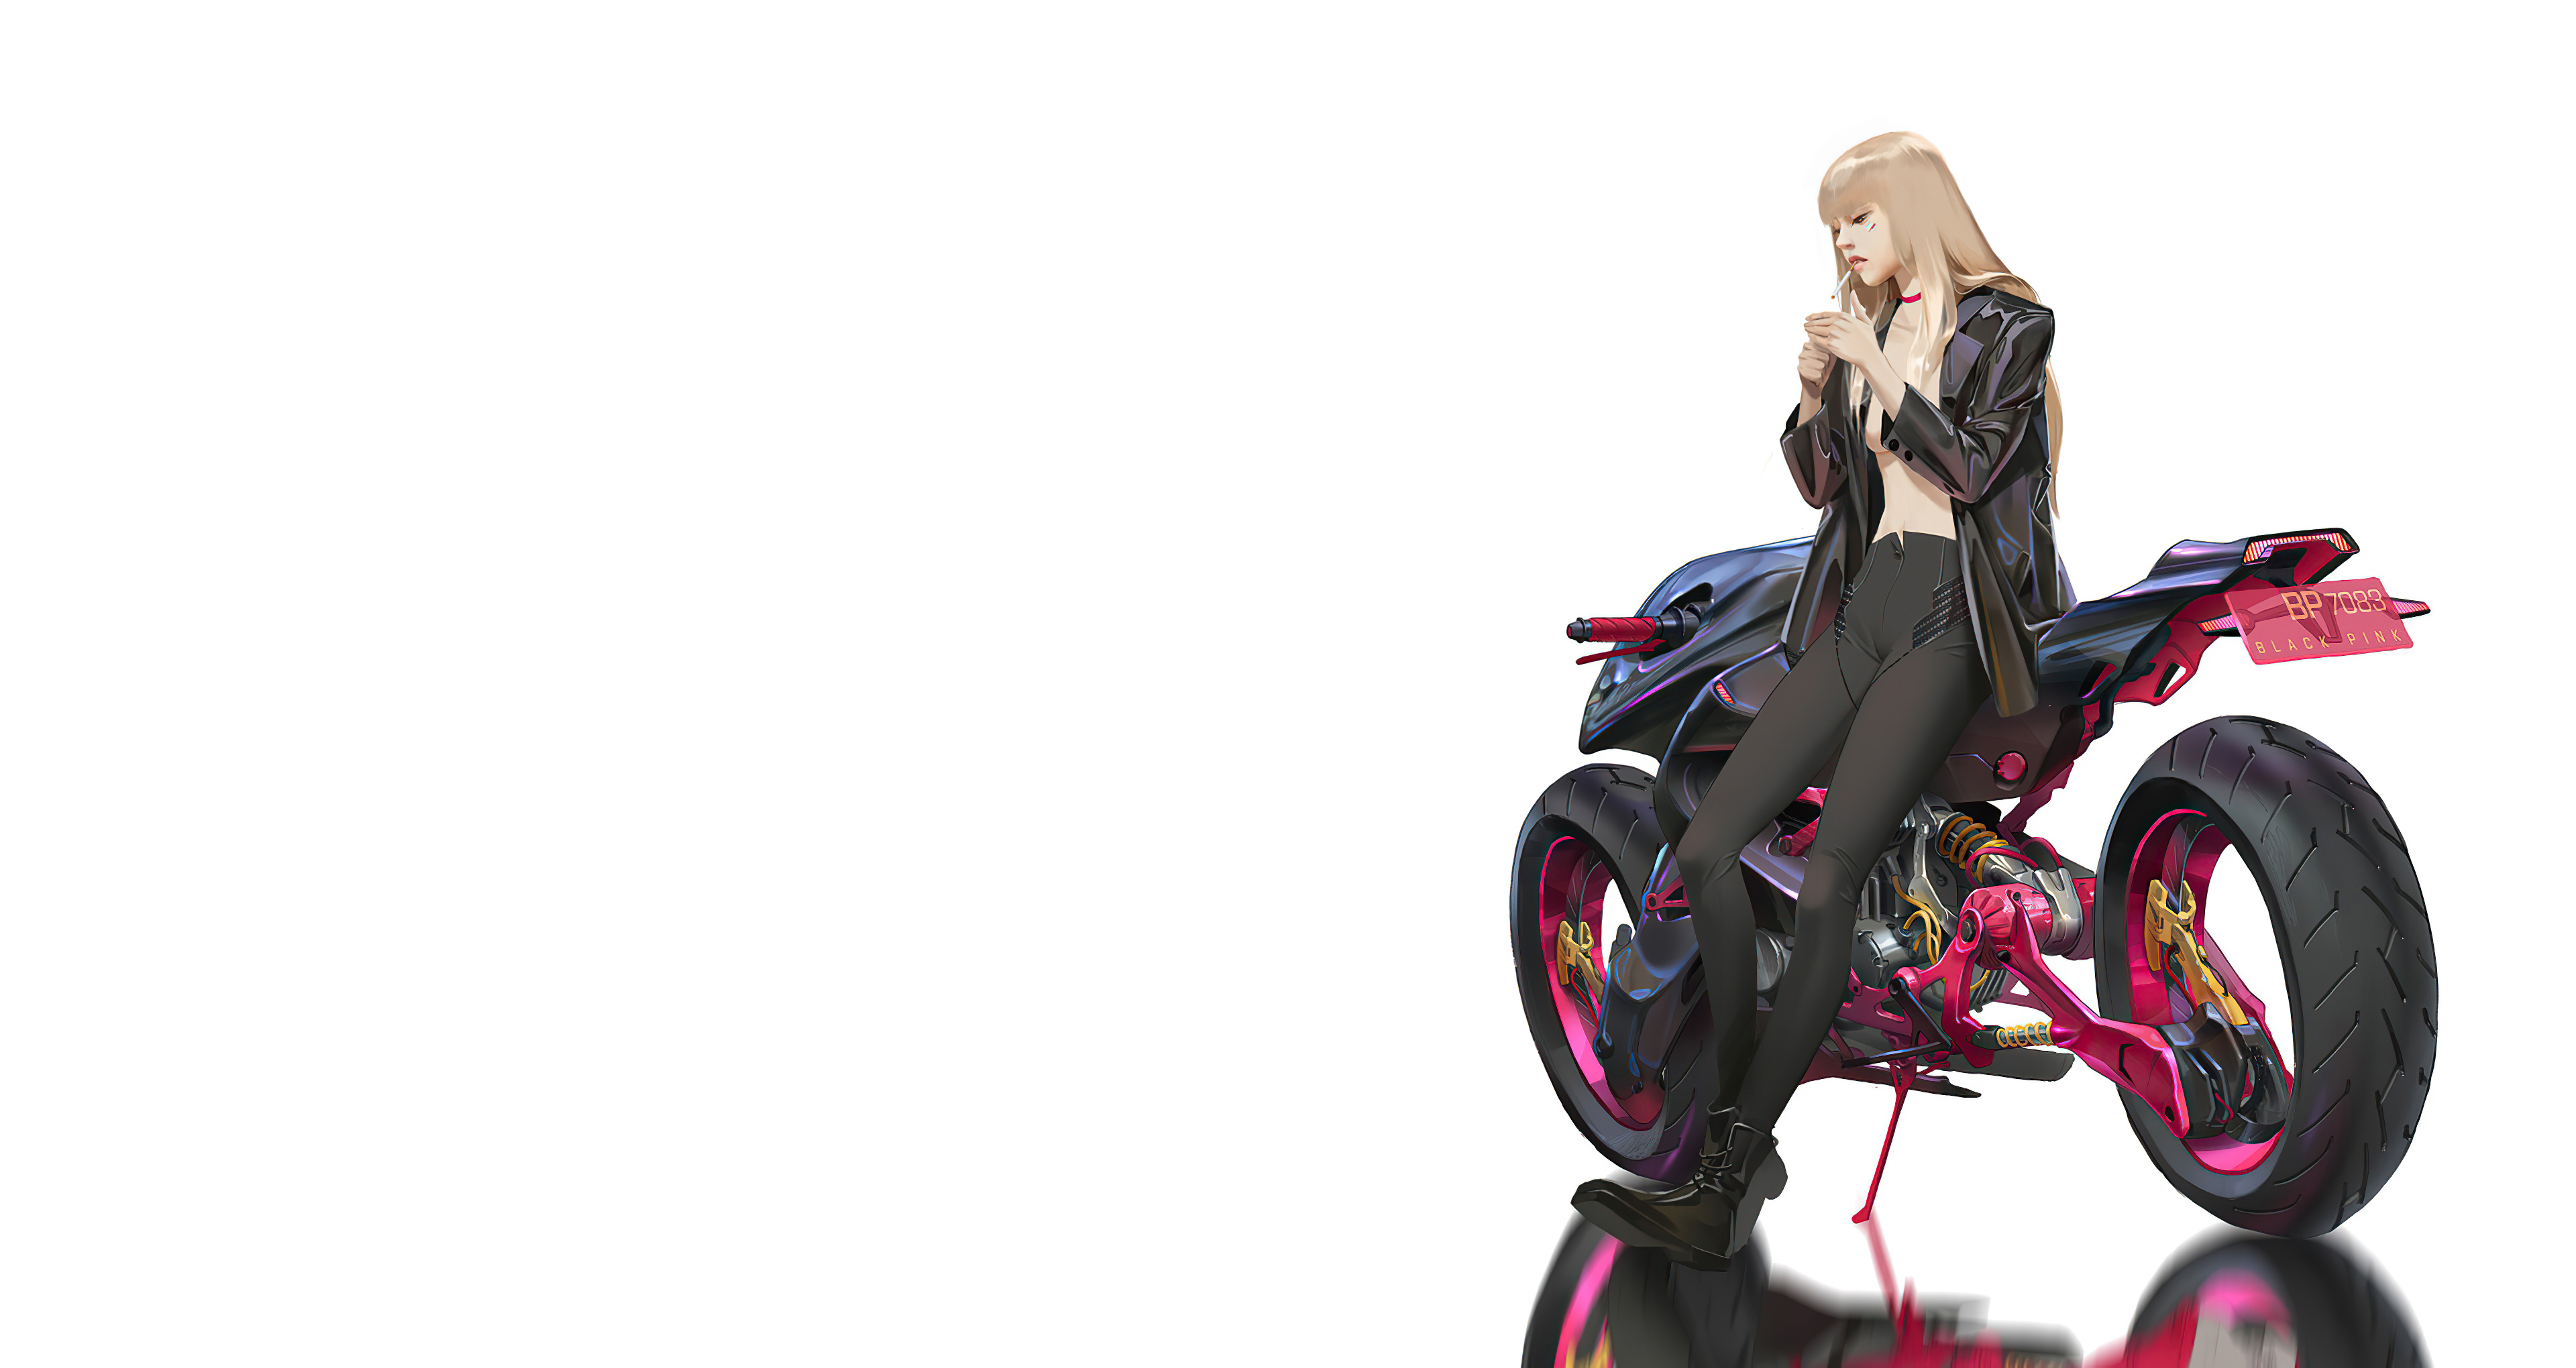 Wallpapers girl motorcycle an anime on the desktop